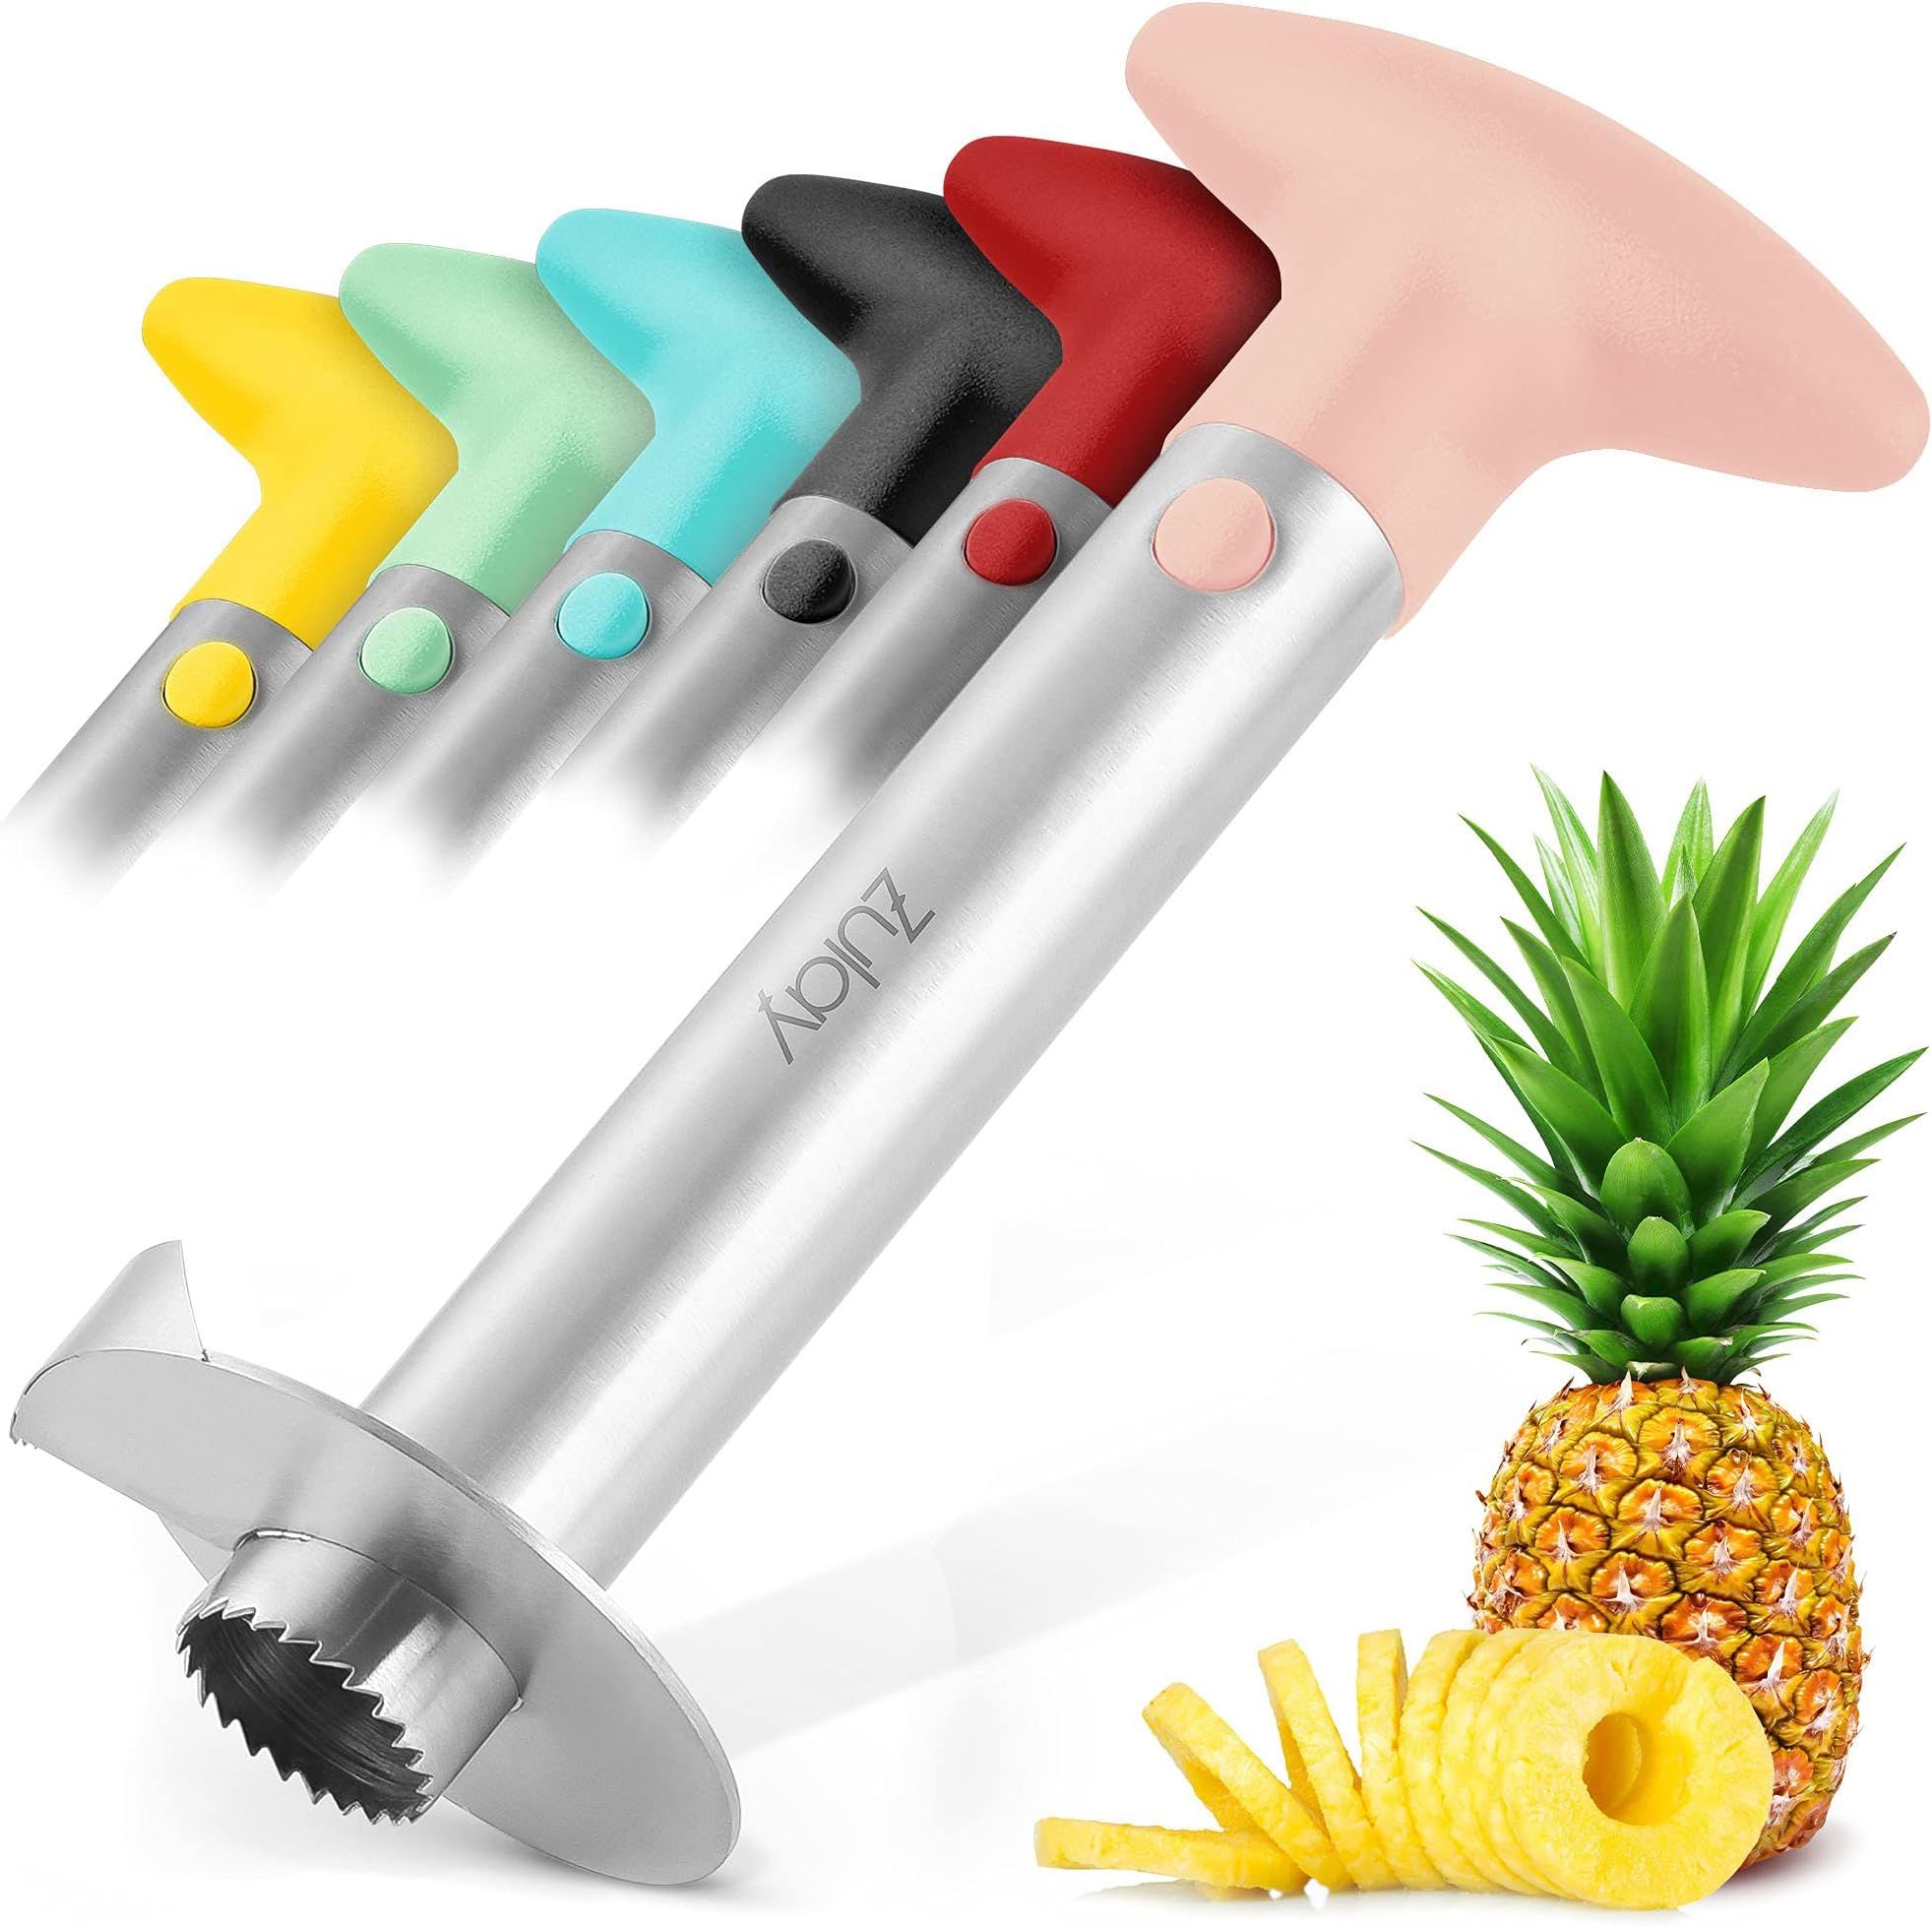 Zulay Kitchen Pineapple Corer and Slicer Tool - Stainless Steel Pineapple Cutter for Easy Core Remov | Amazon (US)